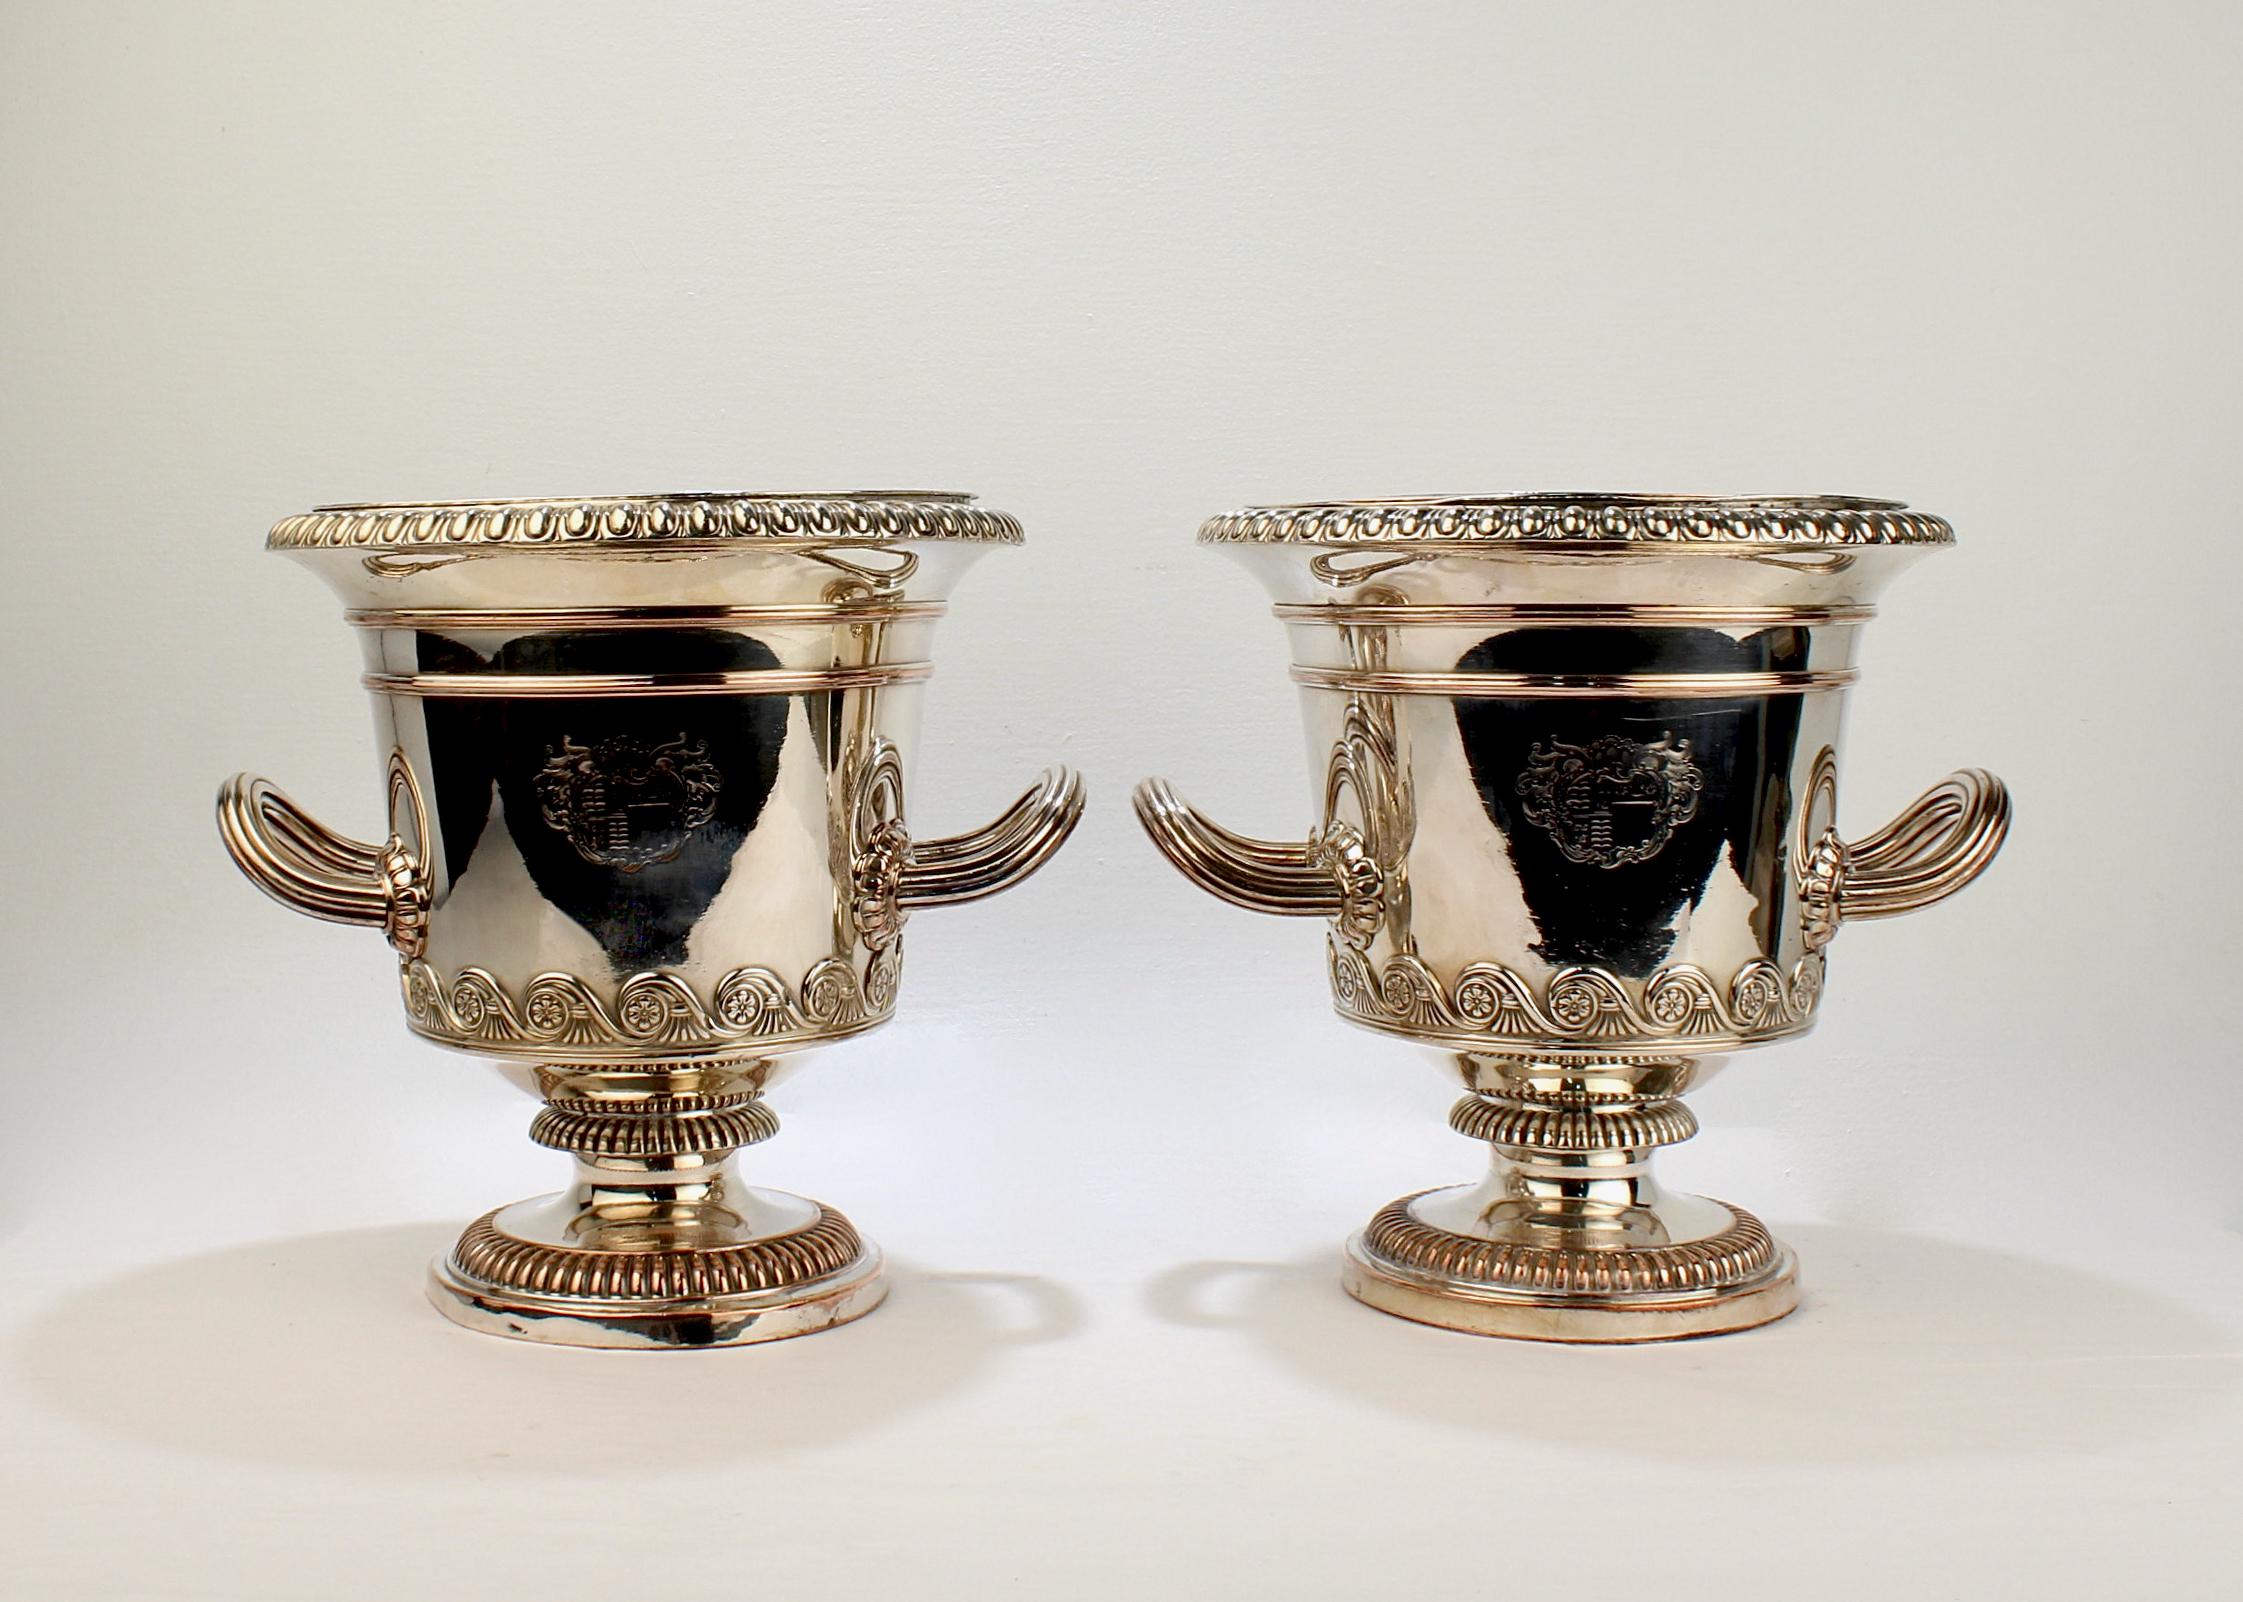 A very fine pair of antique English Sheffield Plate wine coolers.

From the Regency period.

Each with an armorial crest to one side, a rampant lion to the other, a gadrooned rim, reeded handles that terminate in florets, and a reeded foot and